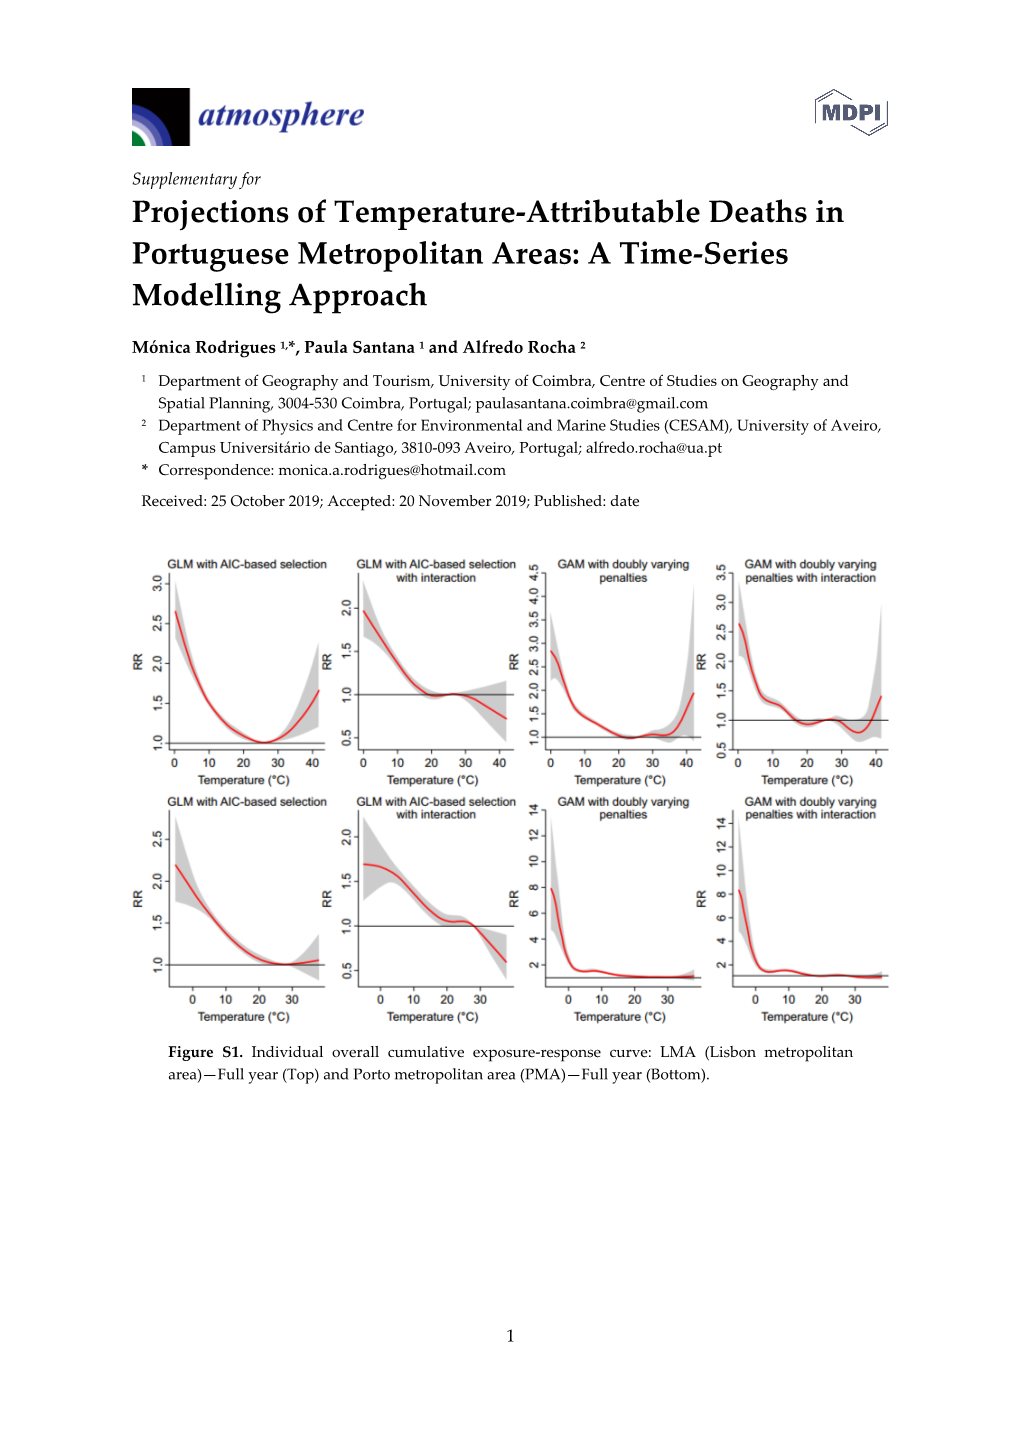 Projections of Temperature-Attributable Deaths in Portuguese Metropolitan Areas: a Time-Series Modelling Approach